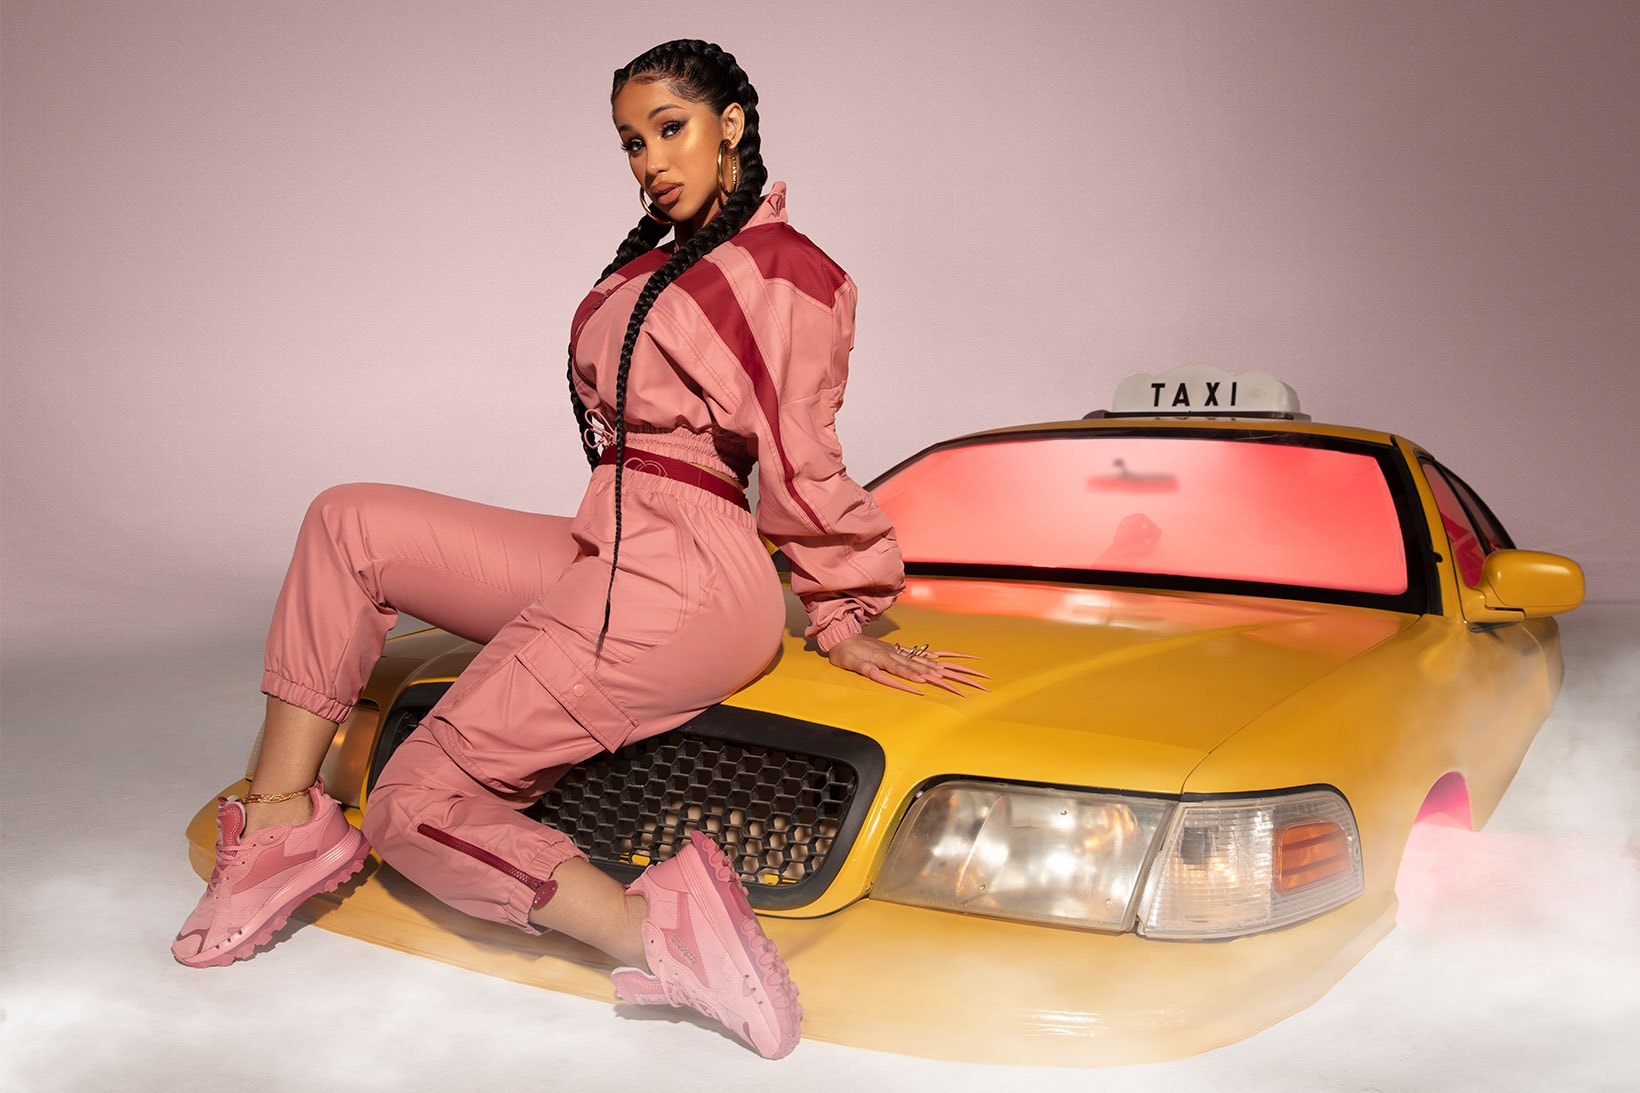 Cardi B Reebok Collaboration Apparel Sneakers NYC Classic Leather Cab Taxi Pink